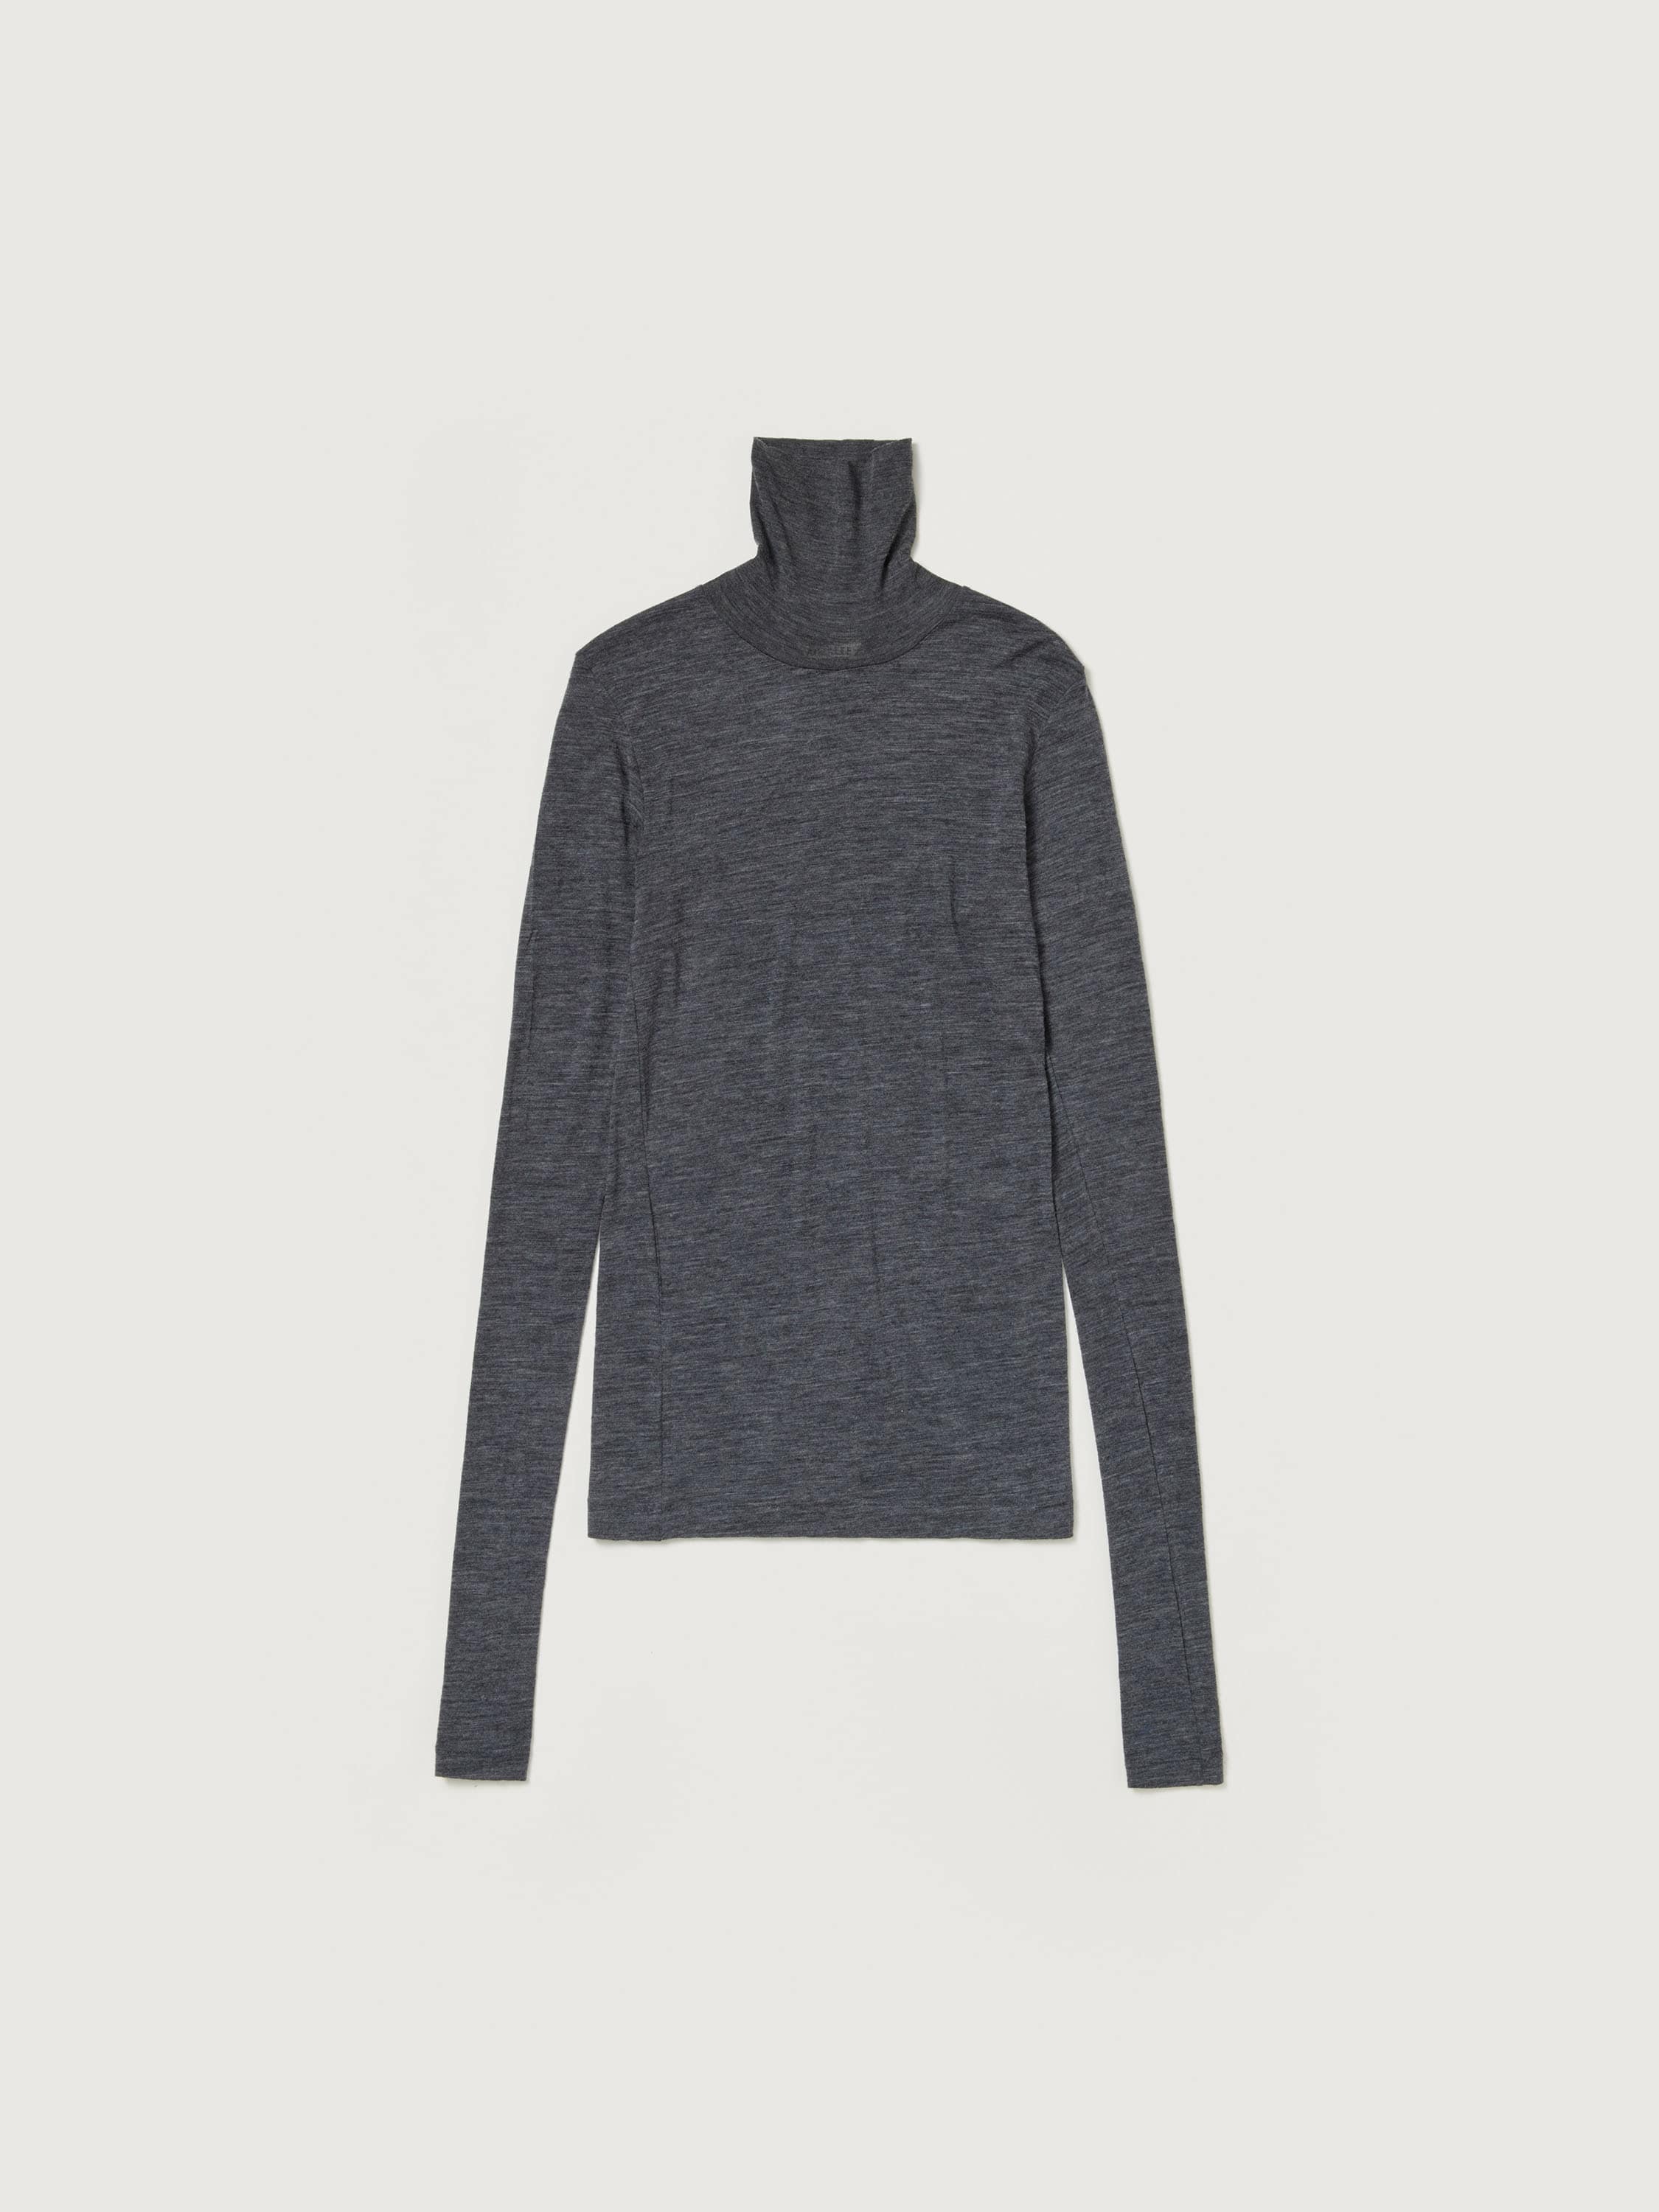 SUPER SOFT WOOL SHEER JERSEY TURTLE 詳細画像 TOP CHARCOAL 1